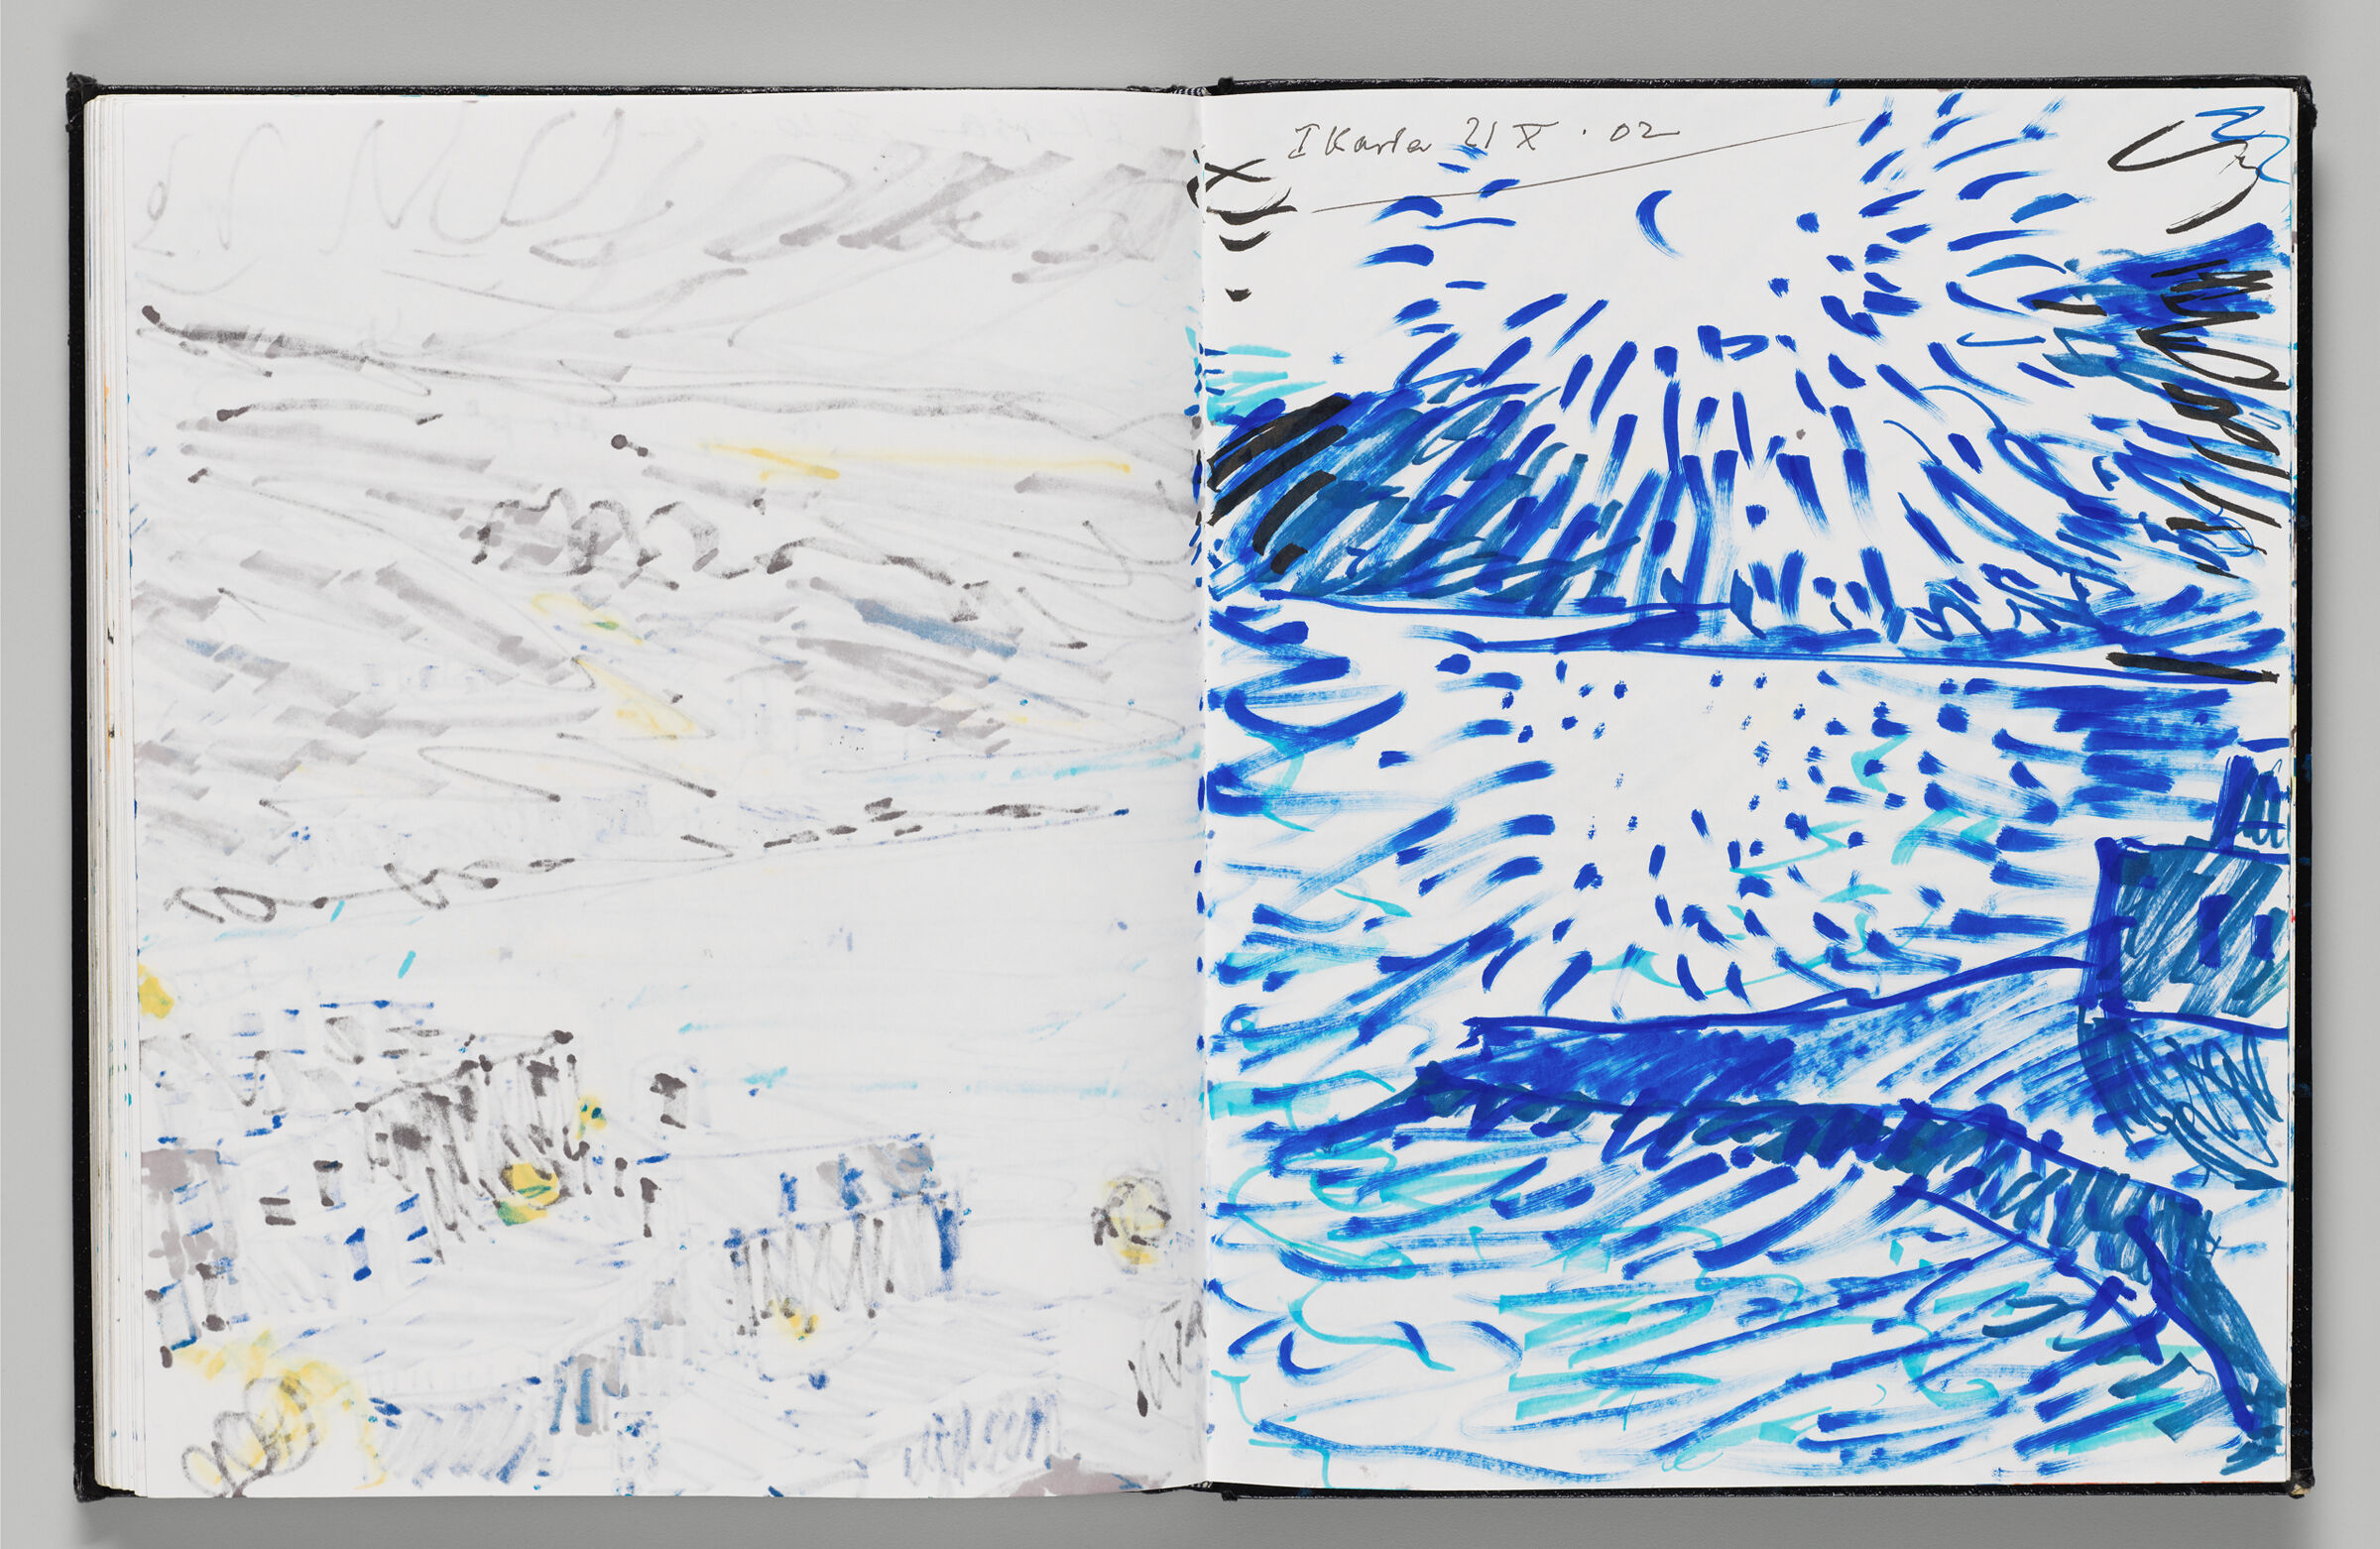 Untitled (Bleed-Through Of Previous Page, Left Page); Untitled (Ikaria Shoreline With Sunburst, Right Page)